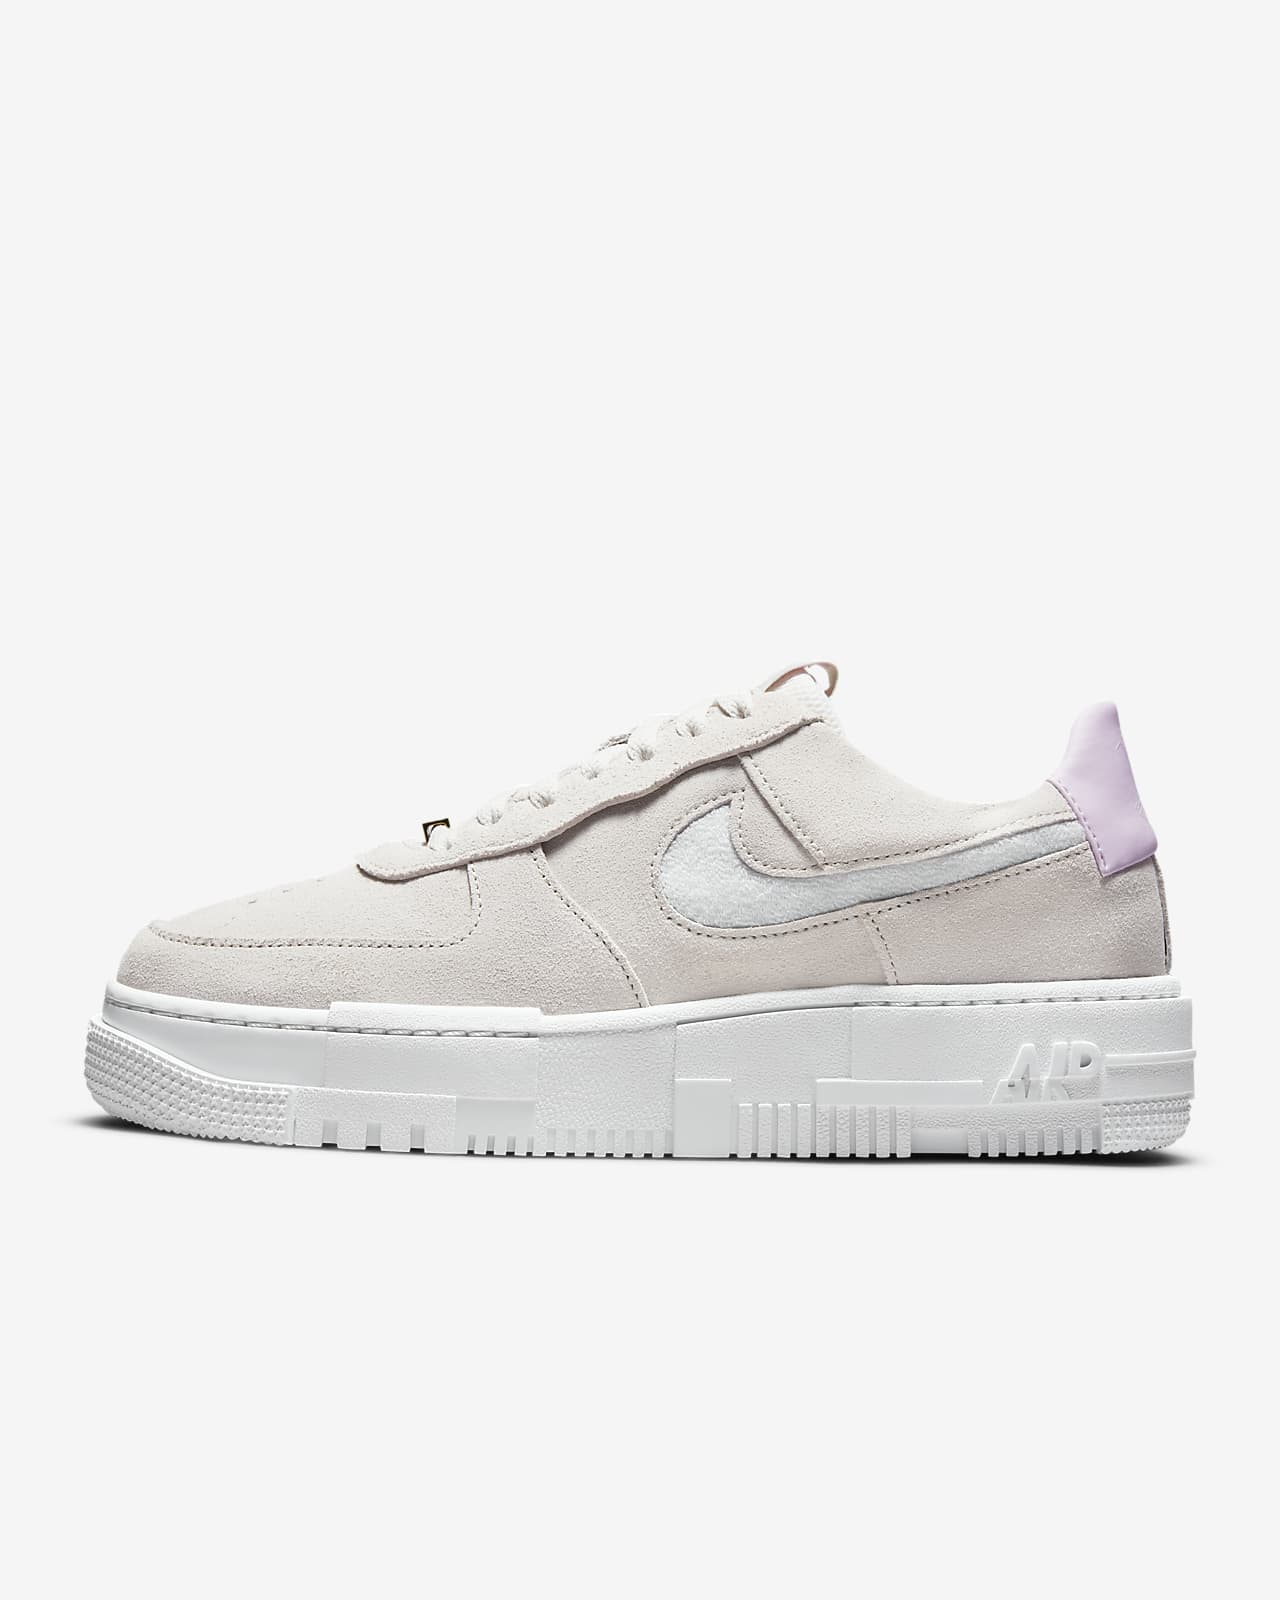 Diplomatic issues Obligate Tend Nike Air Force 1 Pixel Women's Shoes. Nike RO